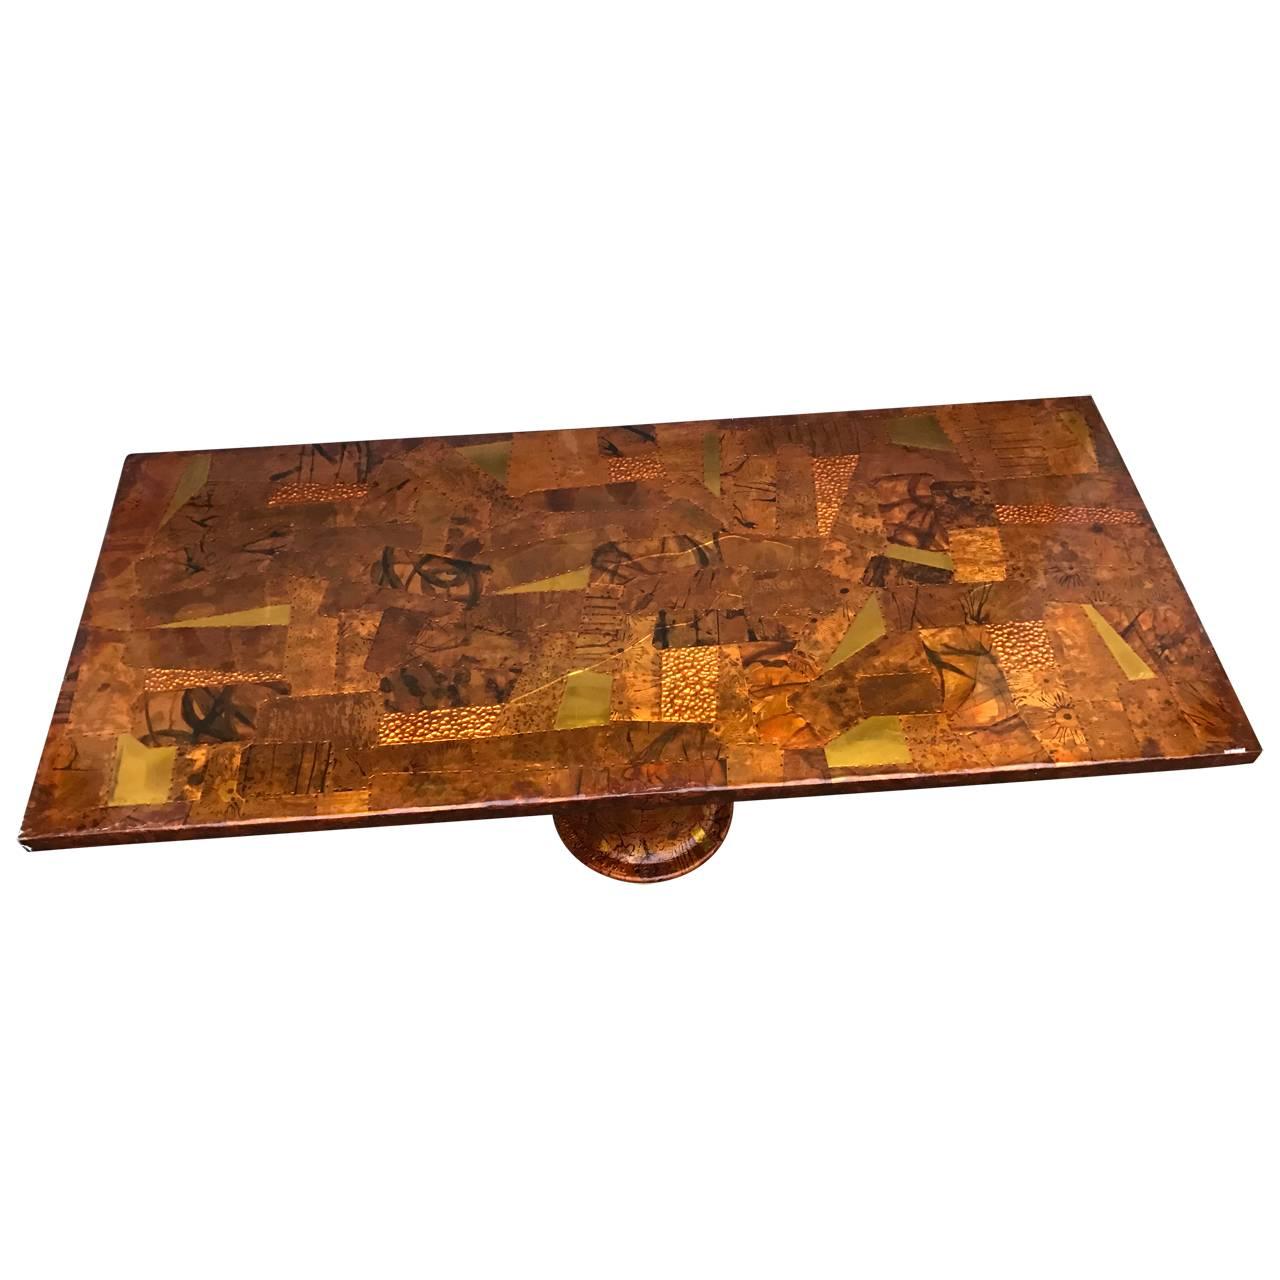 Large patchwork dining table on painted Industrial iron base. Glass top protects the art work.
The tabletop is coated with thick hard lacquer that protect the great looking copper and brass patchwork. 
Glass top is included but not pictured in this